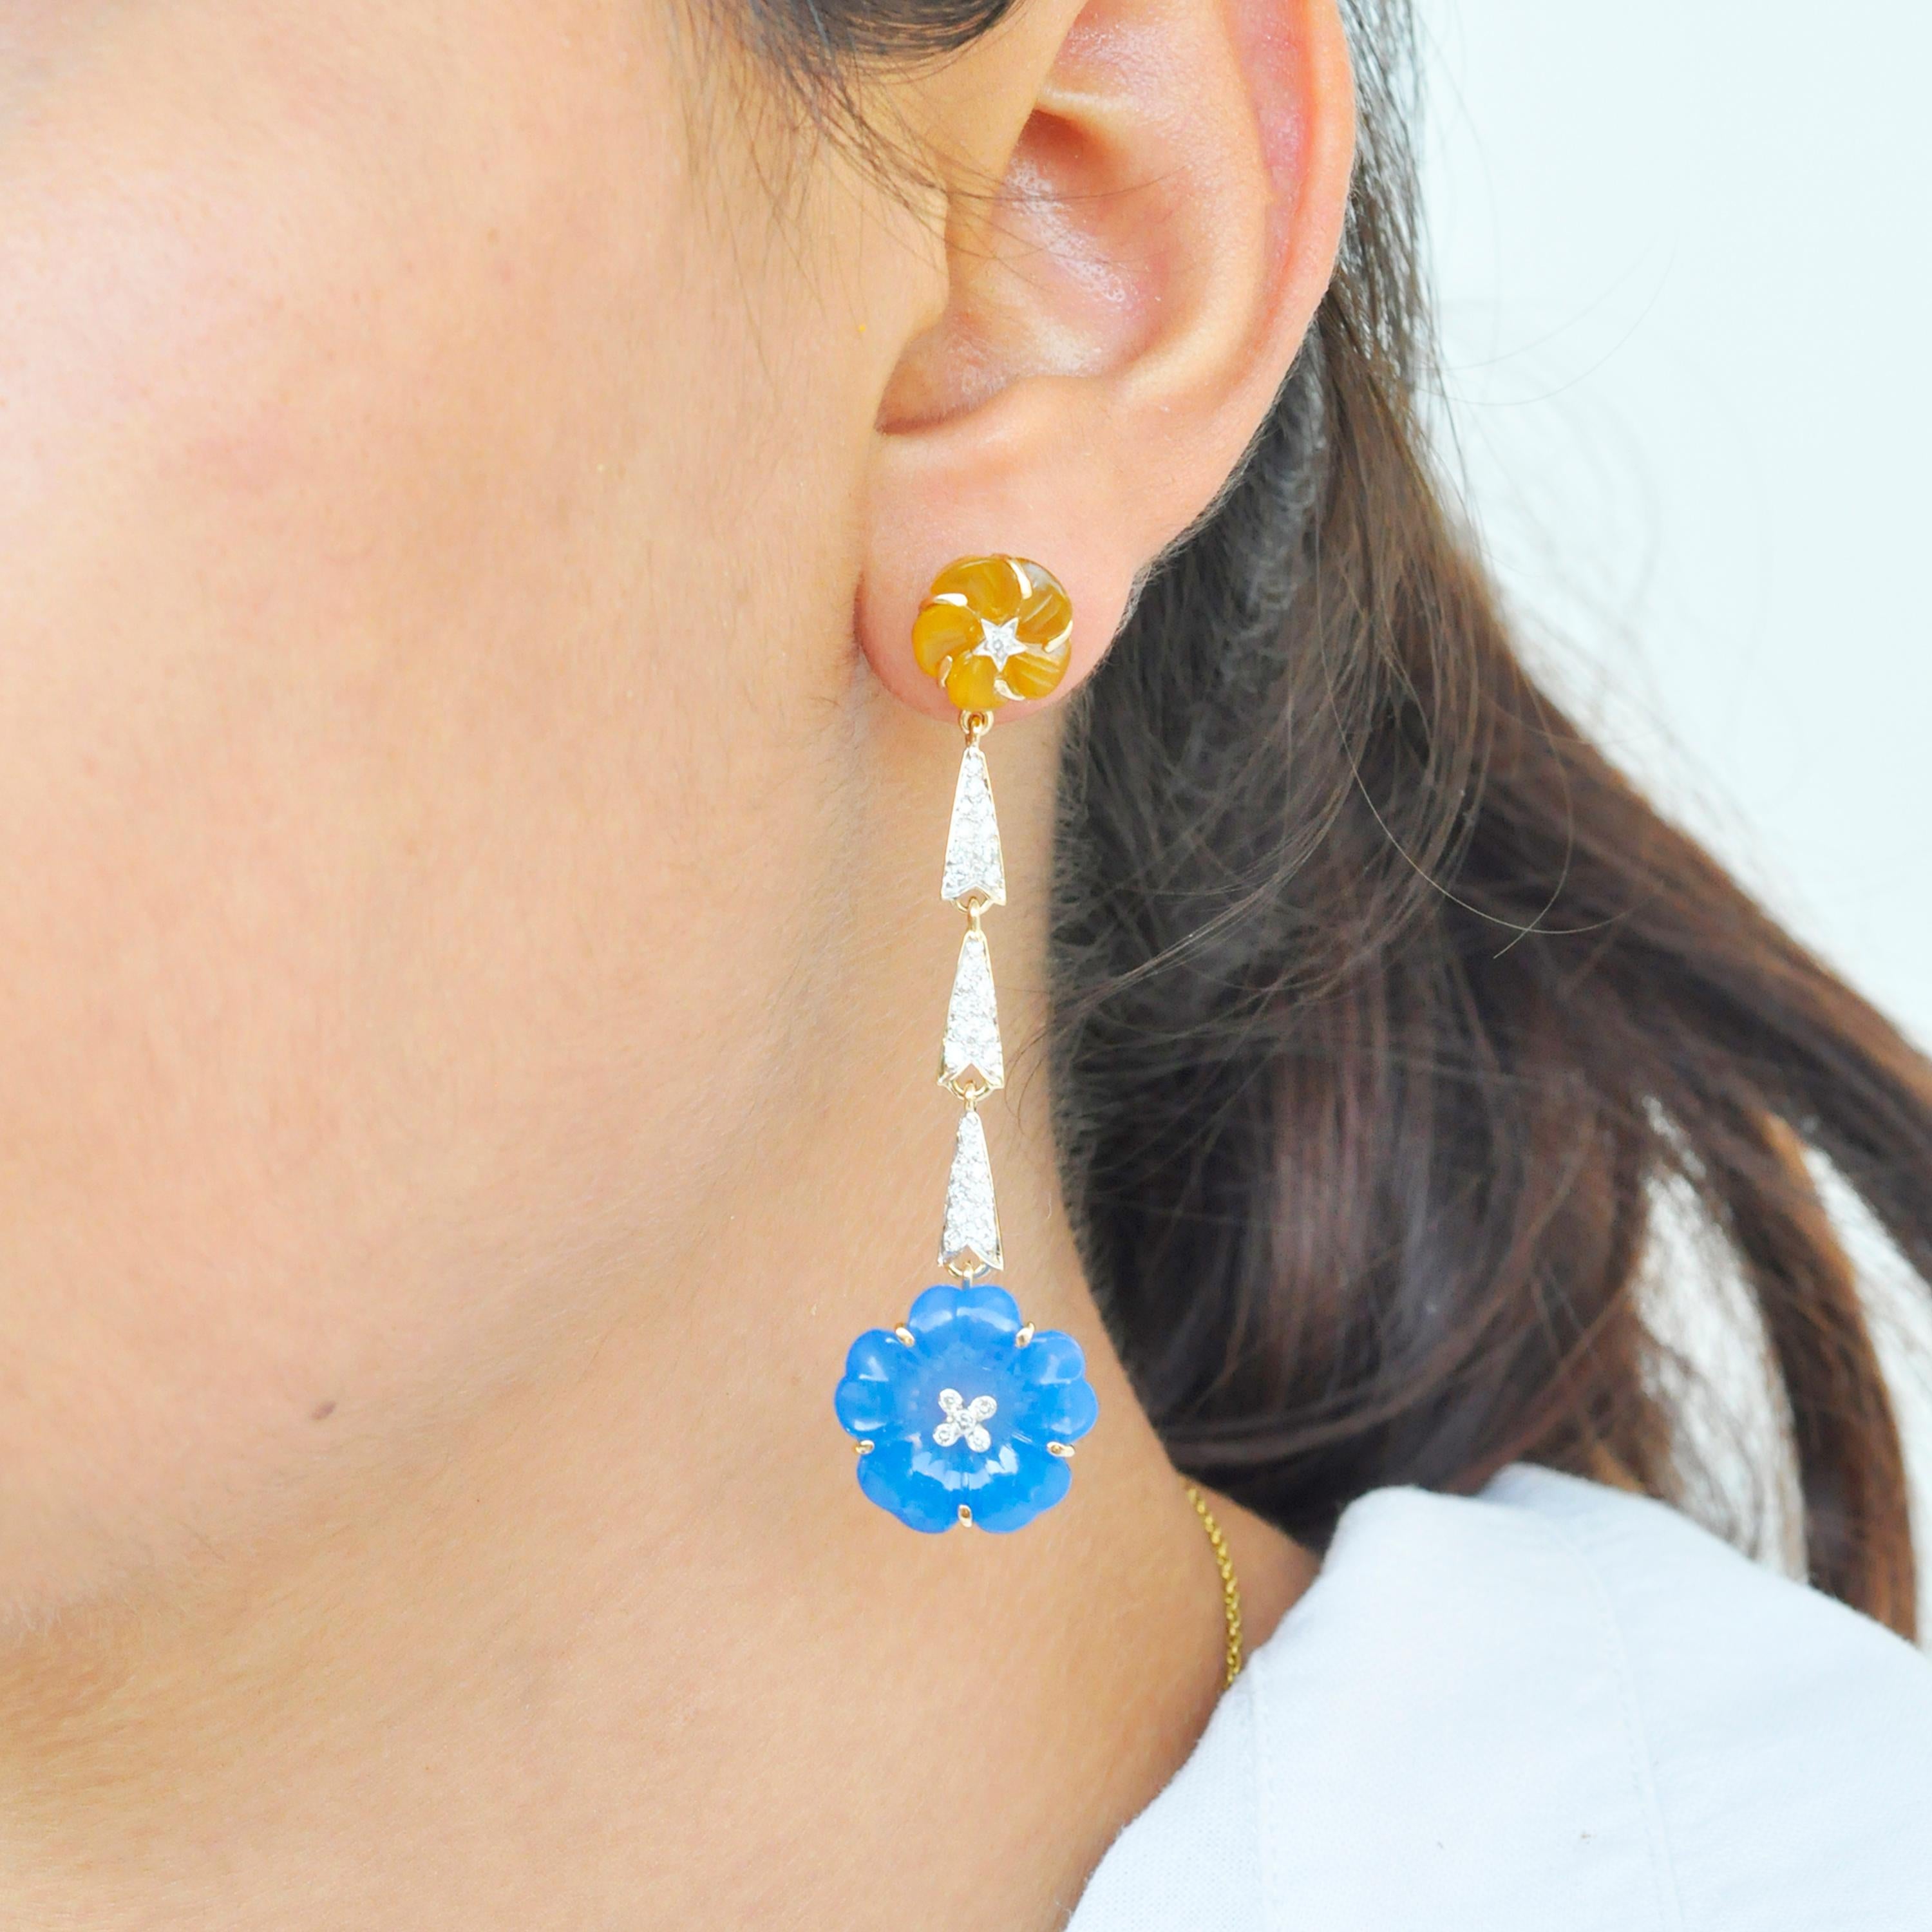 Looking for something chic and completely different? These dangler earrings feature hand carved blue and yellow chalcedony flowers on bottom and top respectively. Joining these two flowers are three streaks of pave set diamonds, set in 18K gold. The